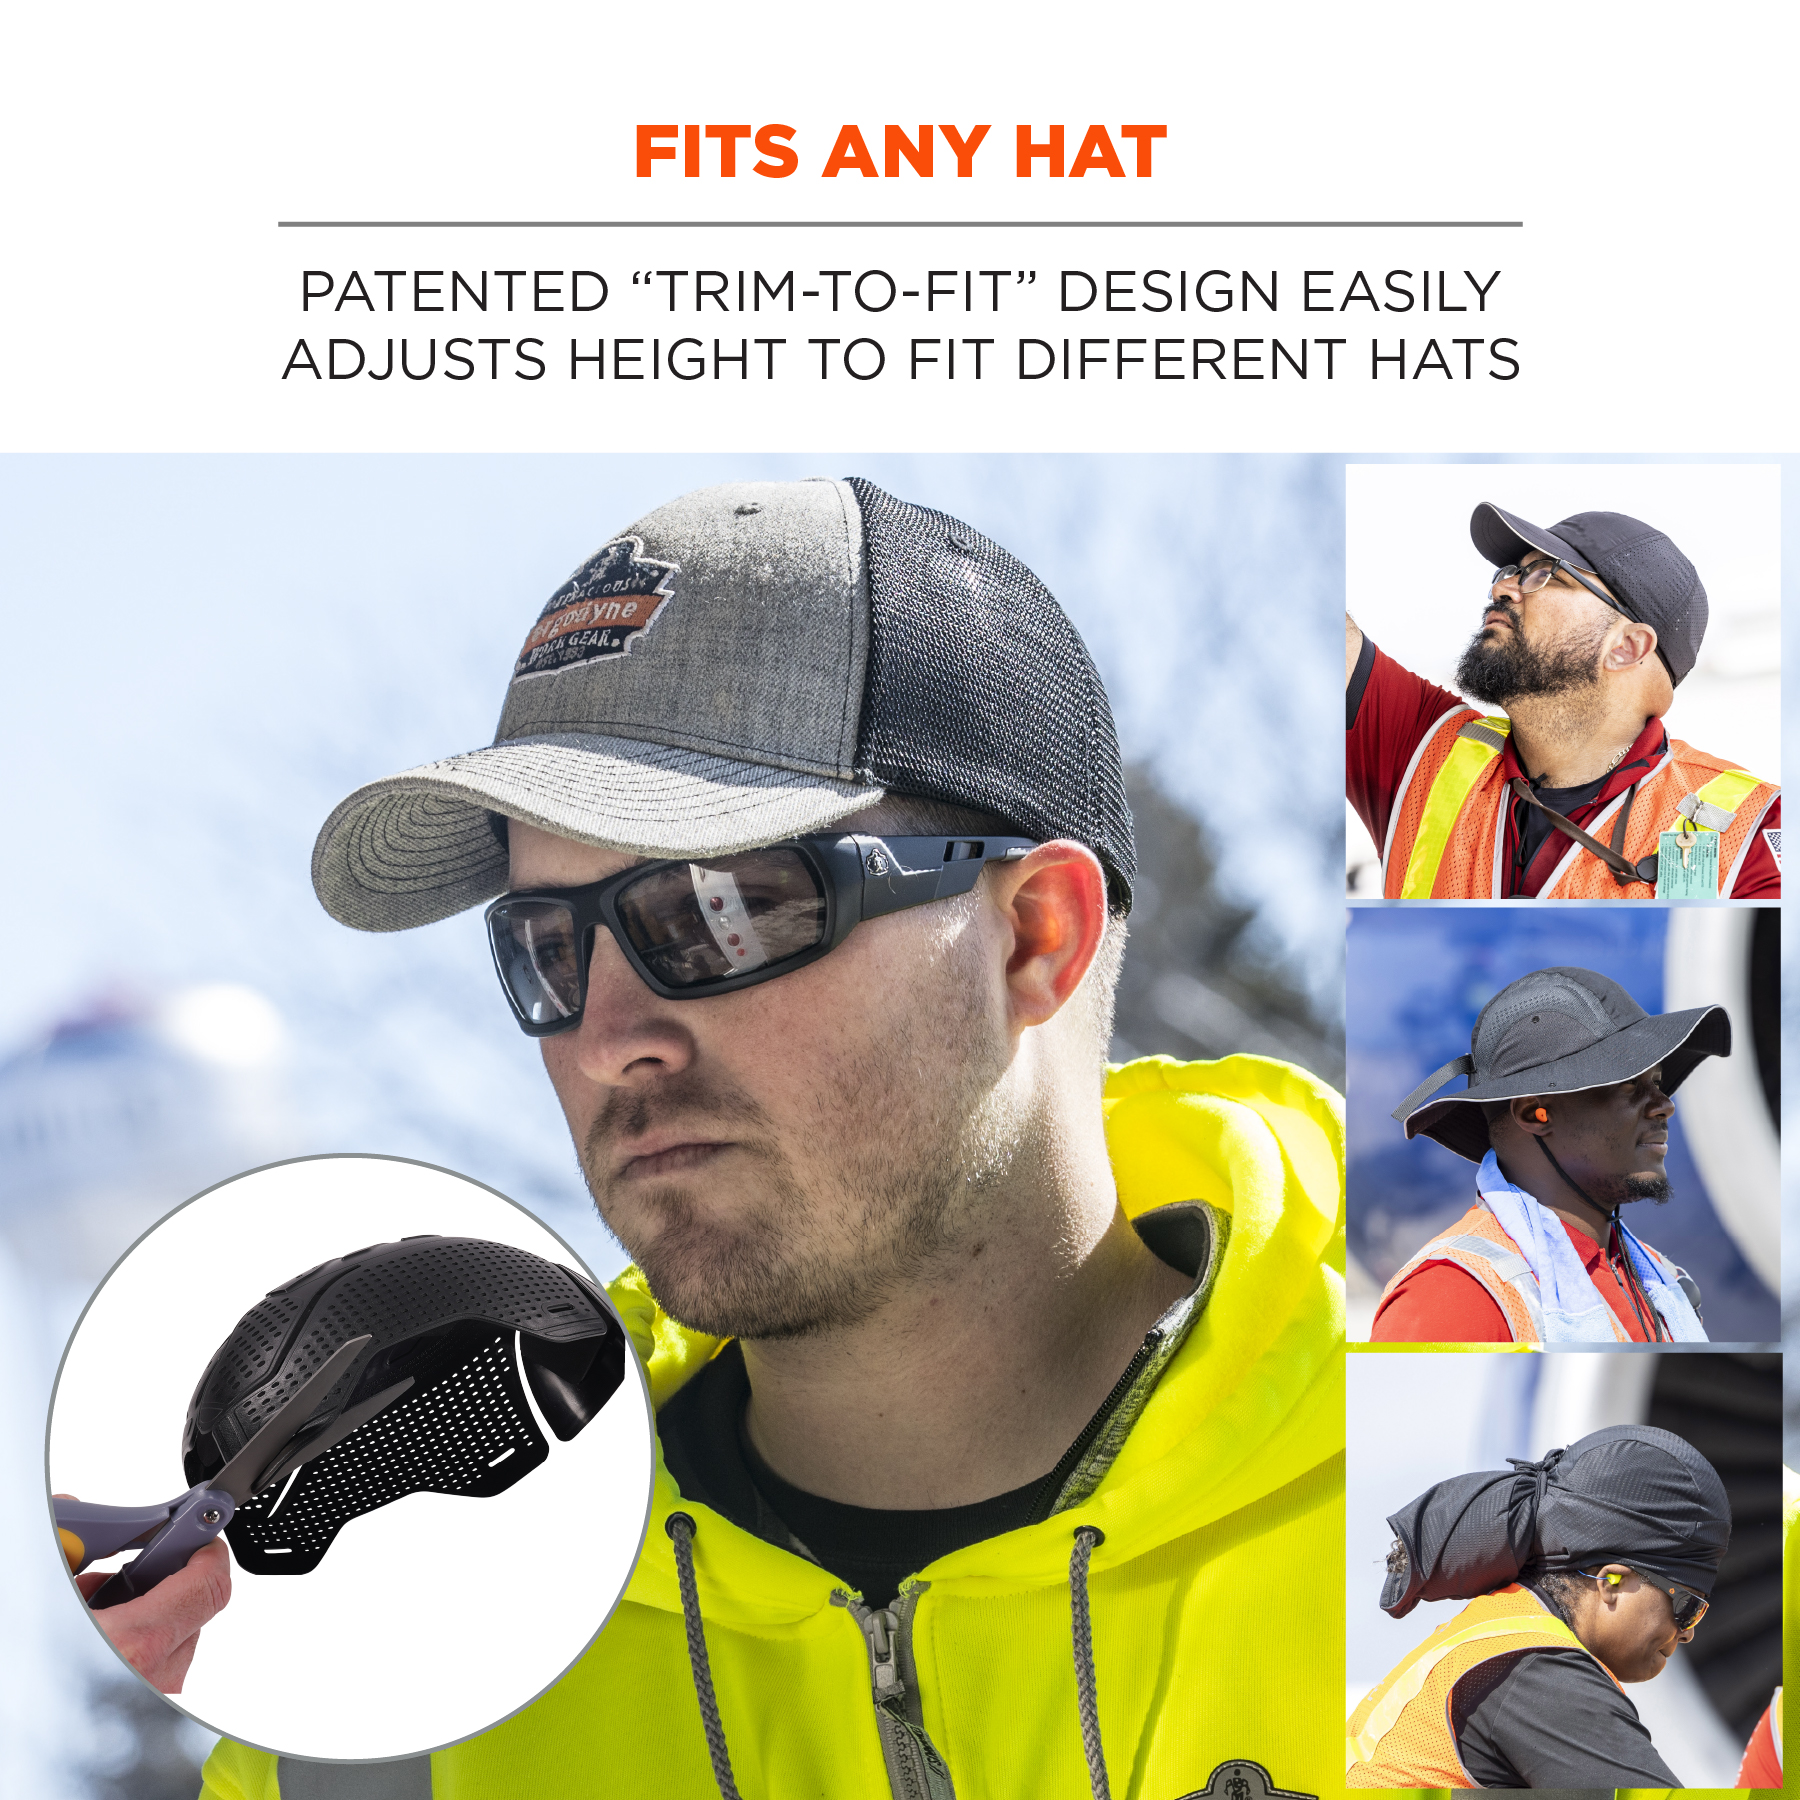 Humangear capCAP+ fits on the Yonder. Not a bad alternative to the